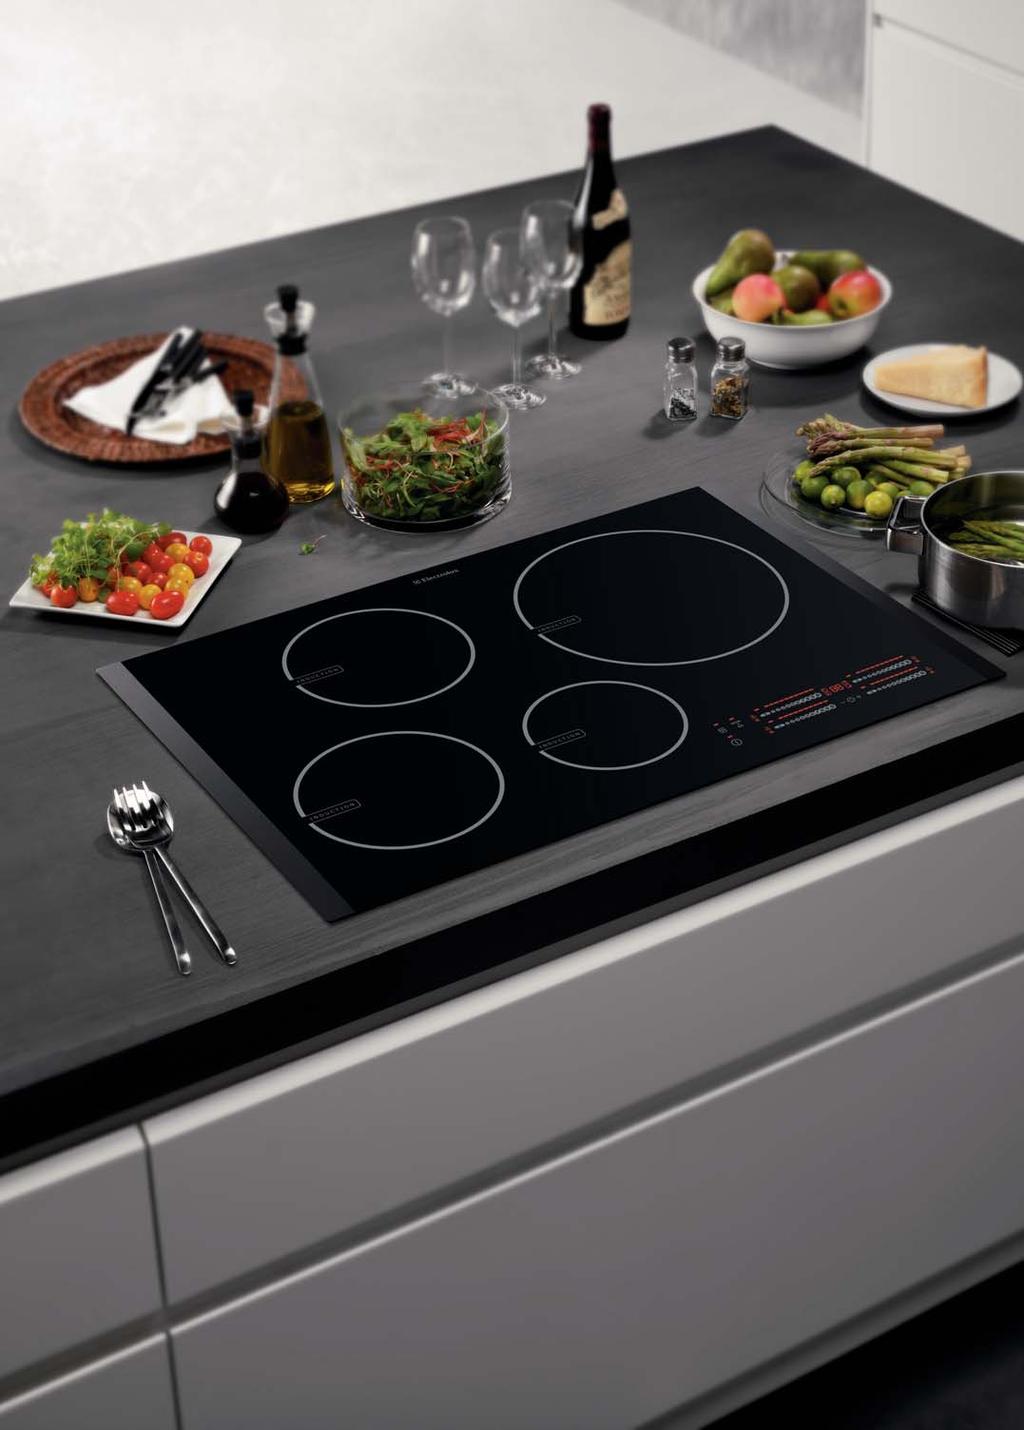 30 electrolux cooking electrolux cooking 31 The hottest hobs with the latest features.